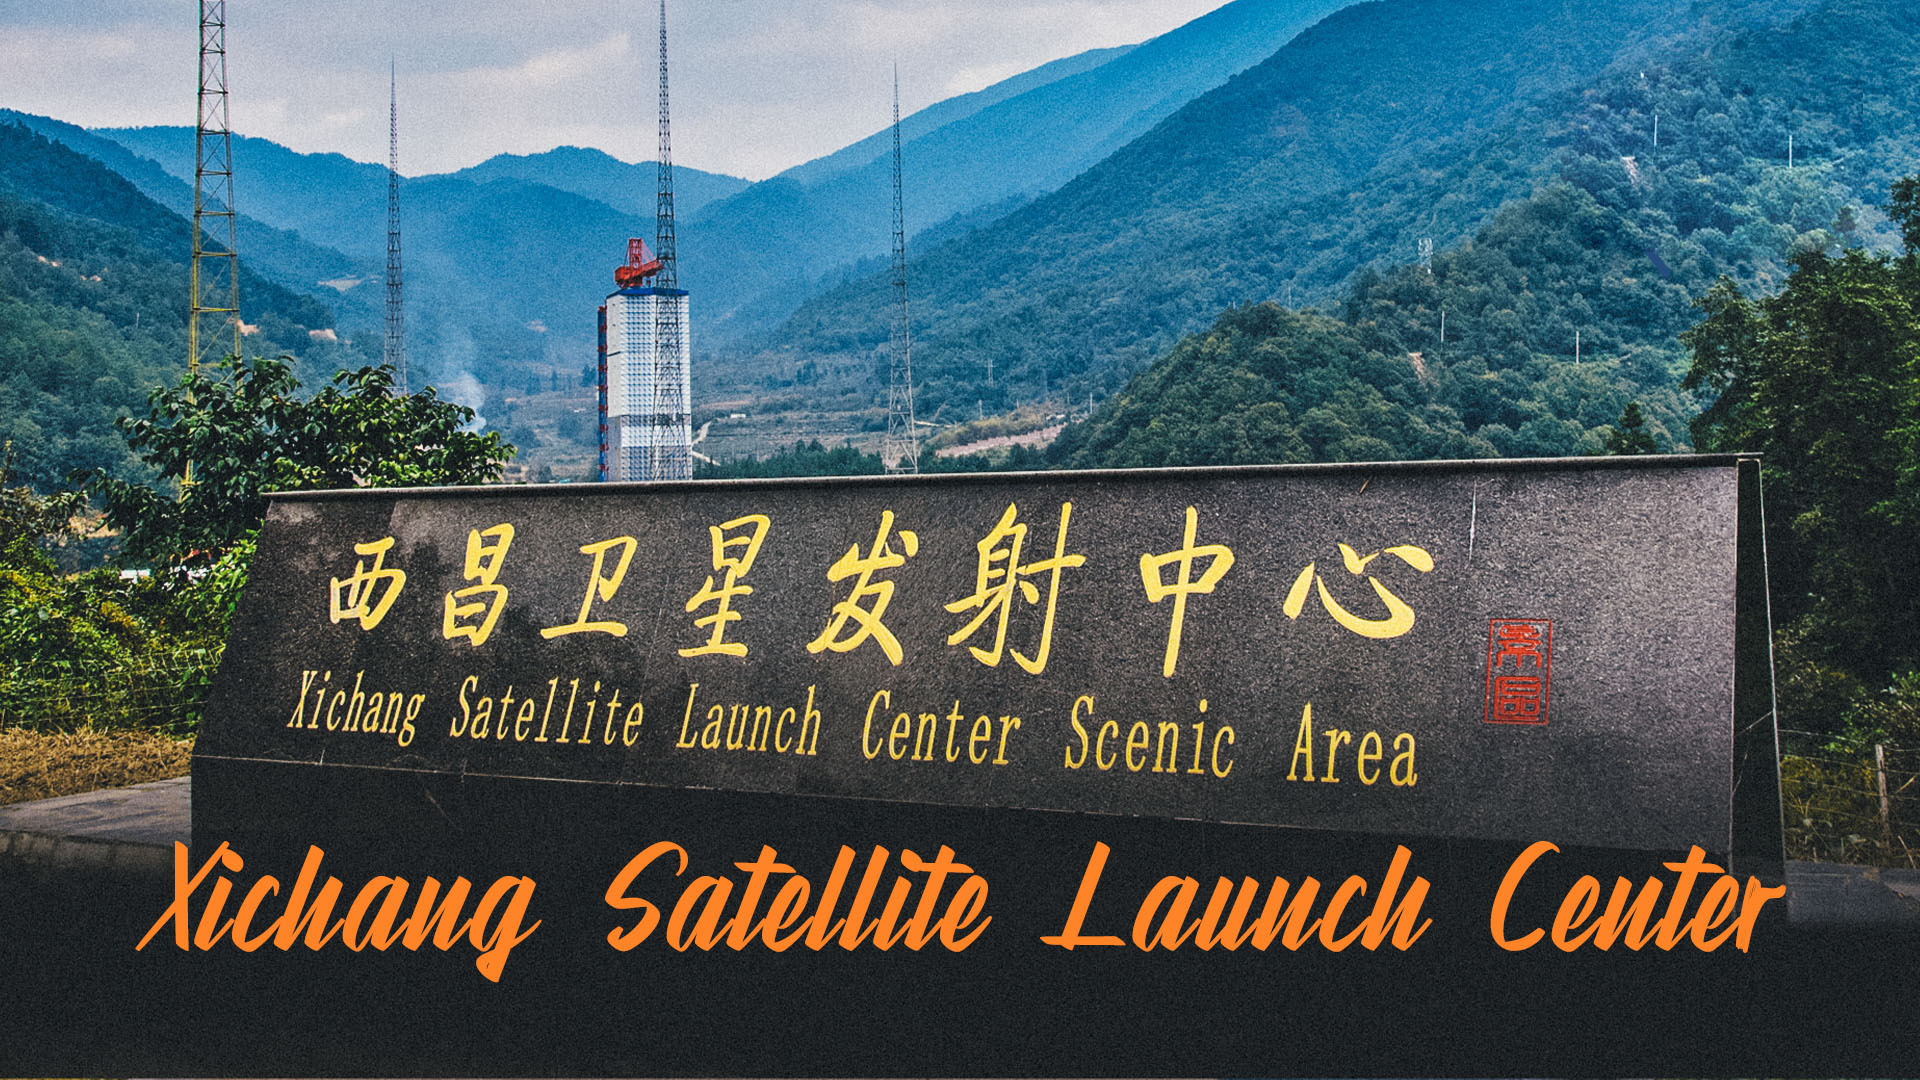 A view of the Xichang Satellite Launch Center in southwest China's Sichuan Province. /CGTN